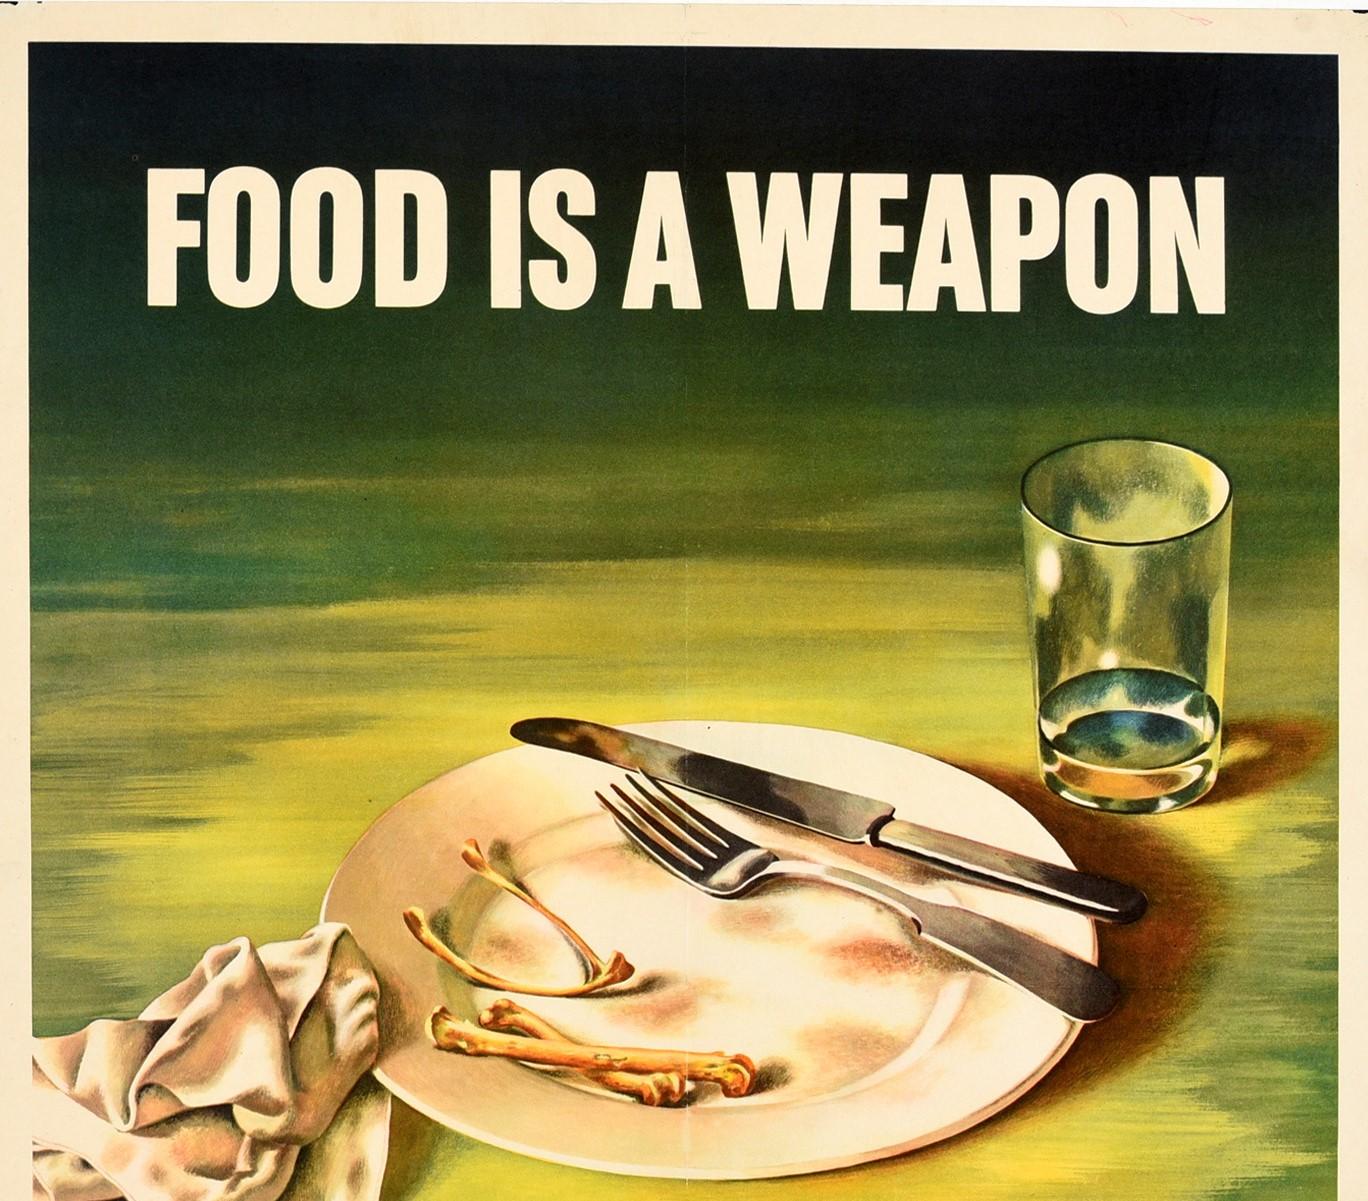 Original vintage World War Two poster - Food is a weapon Don't waste it! Buy wisely Cook Carefully Eat it all Follow the National Wartime Nutrition Program - featuring a great design showing a knife and fork on the side of a plate with only a